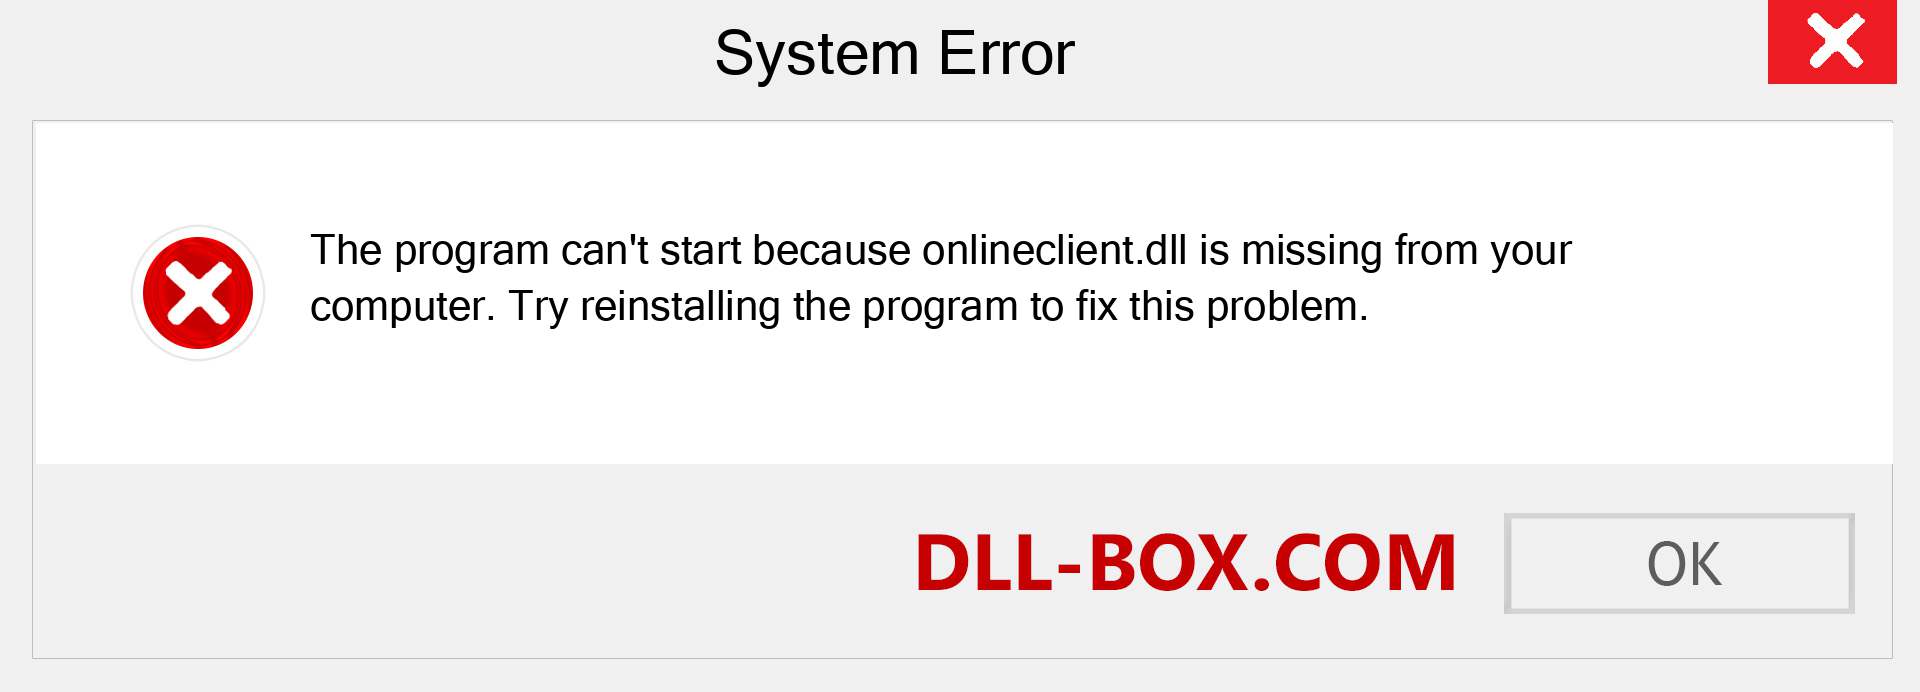  onlineclient.dll file is missing?. Download for Windows 7, 8, 10 - Fix  onlineclient dll Missing Error on Windows, photos, images